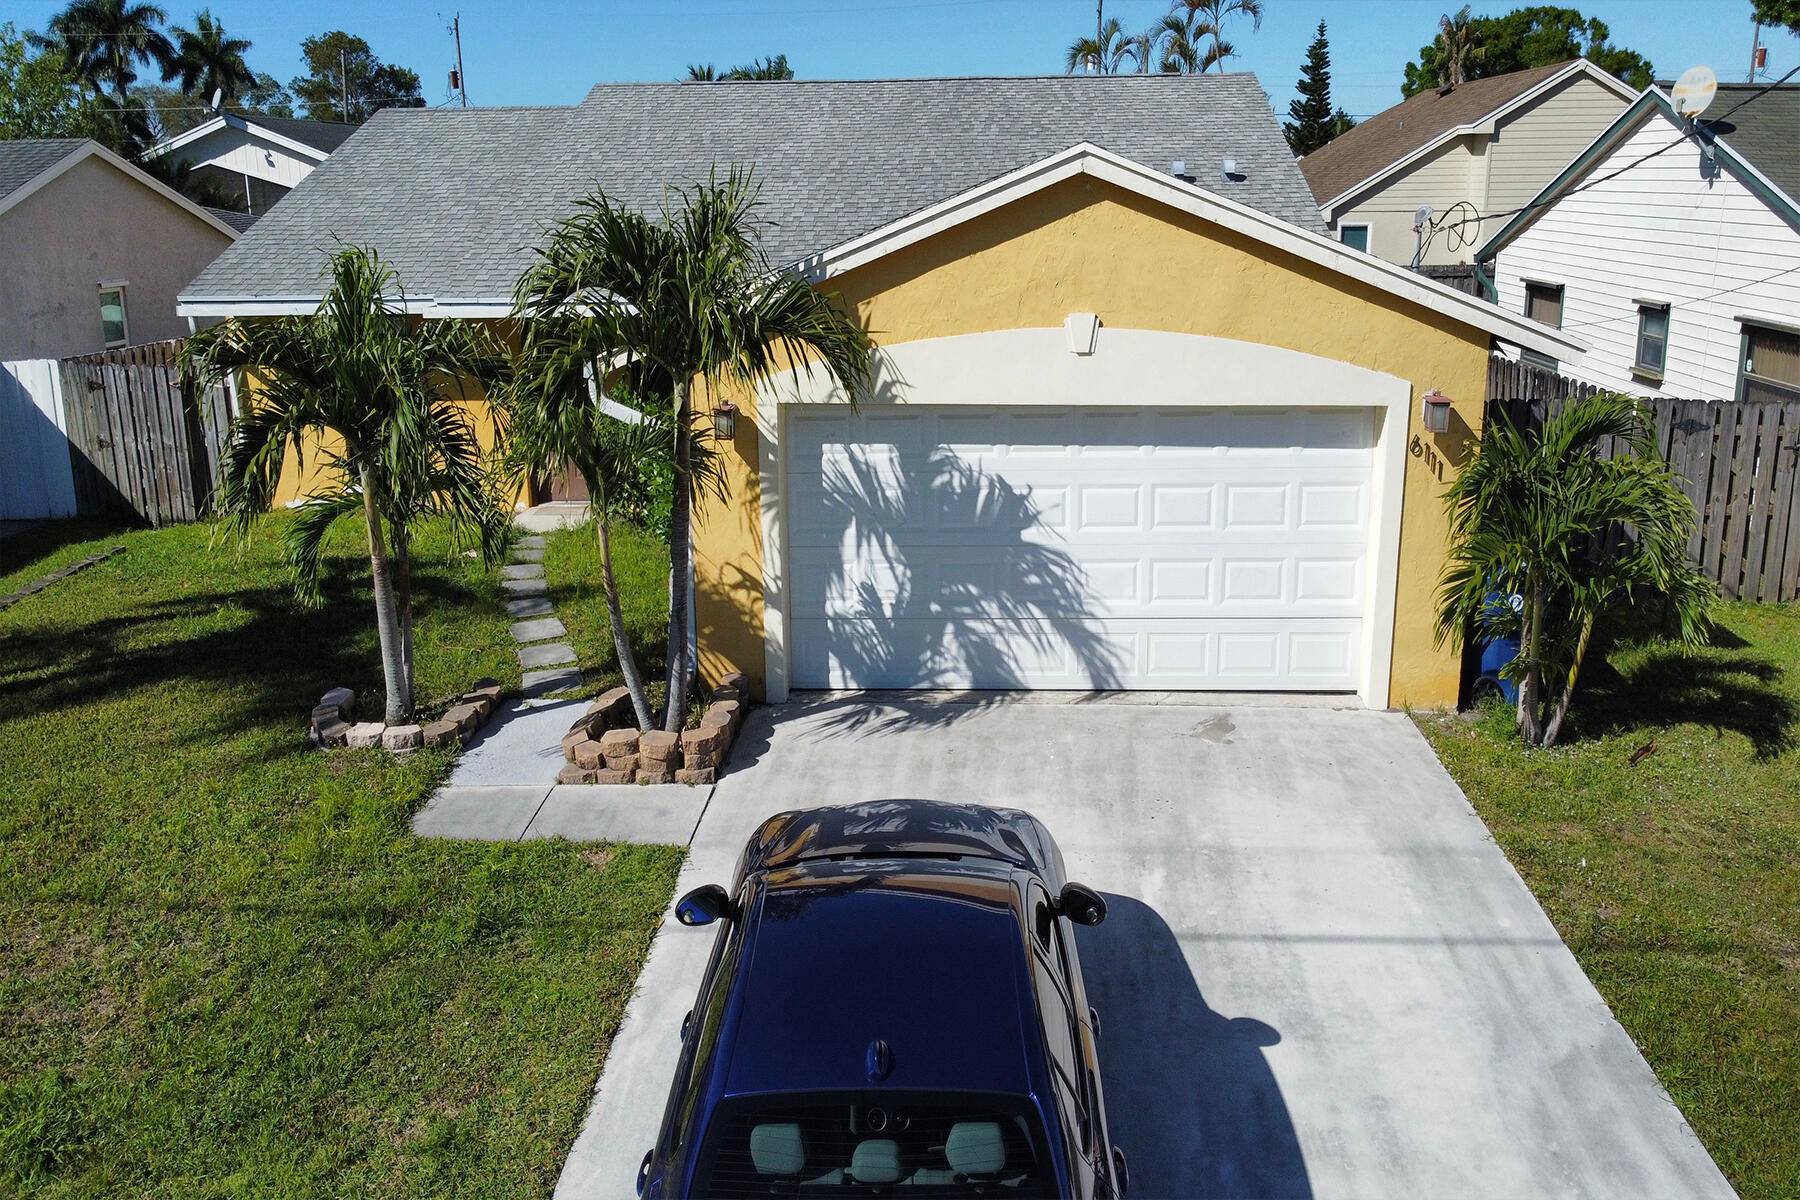 Amazing opportunity to BUY in one of Jupiter's most desire neighborhoods with NO HOA.